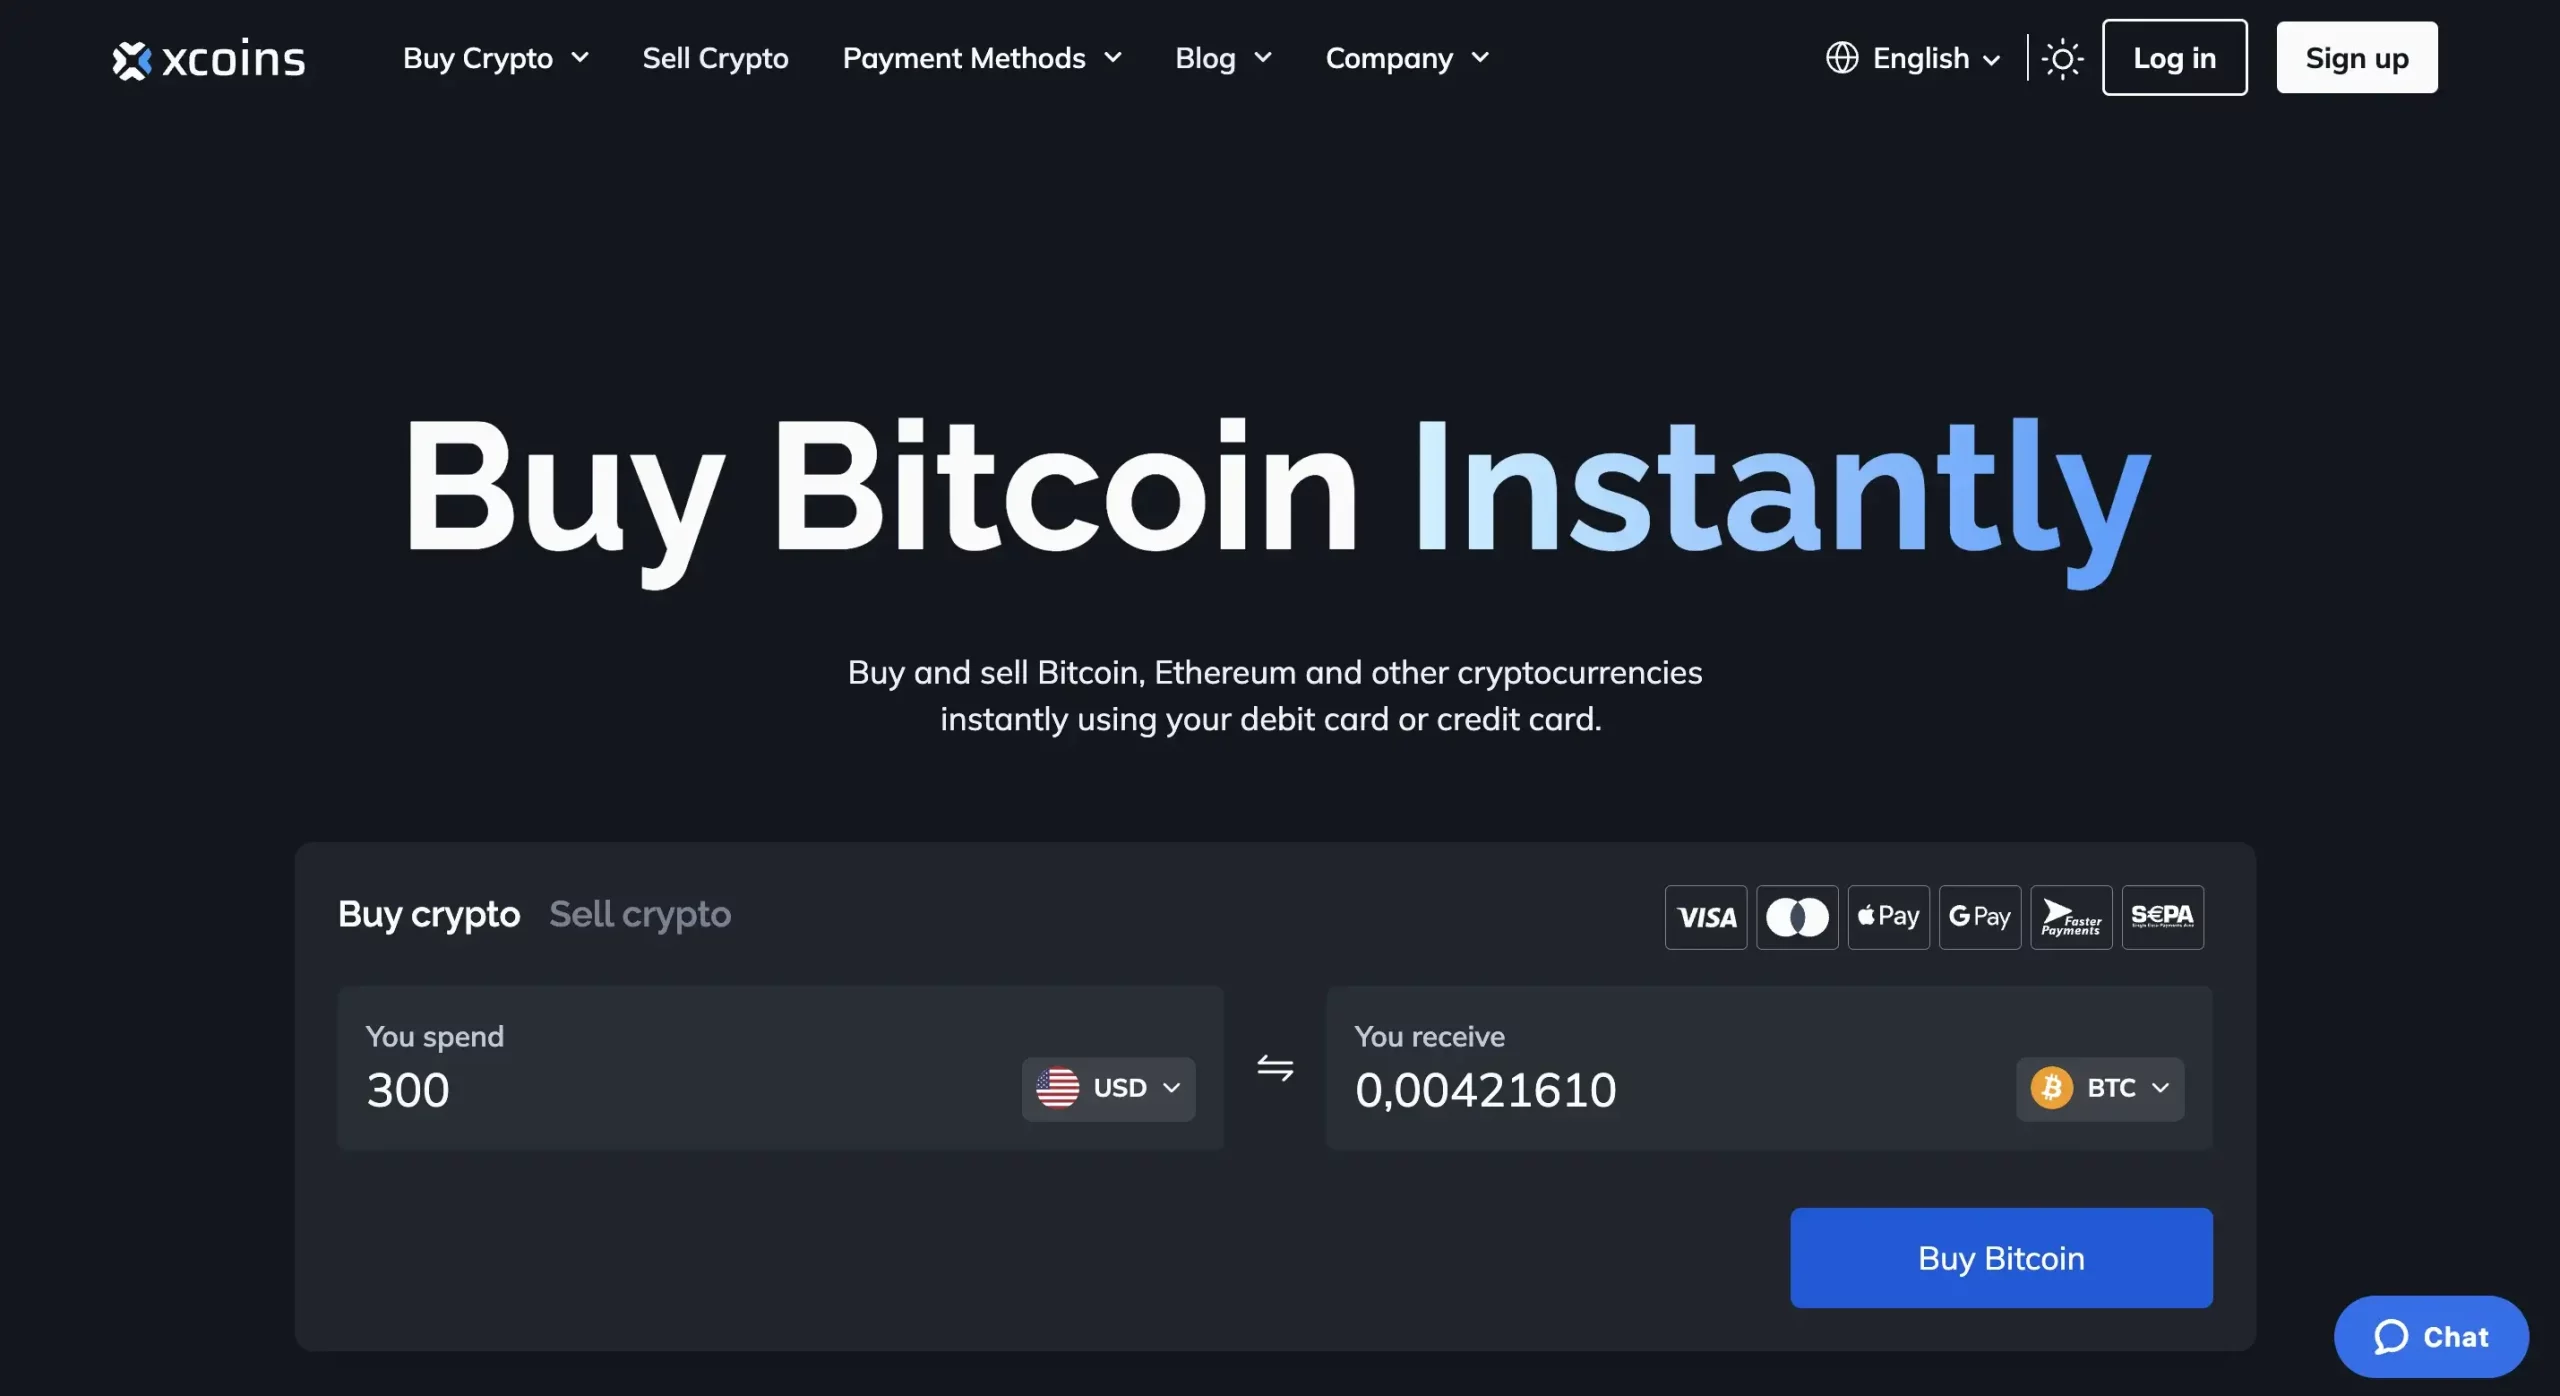 2. How to buy Bitcoin with Google Pay on XCoins